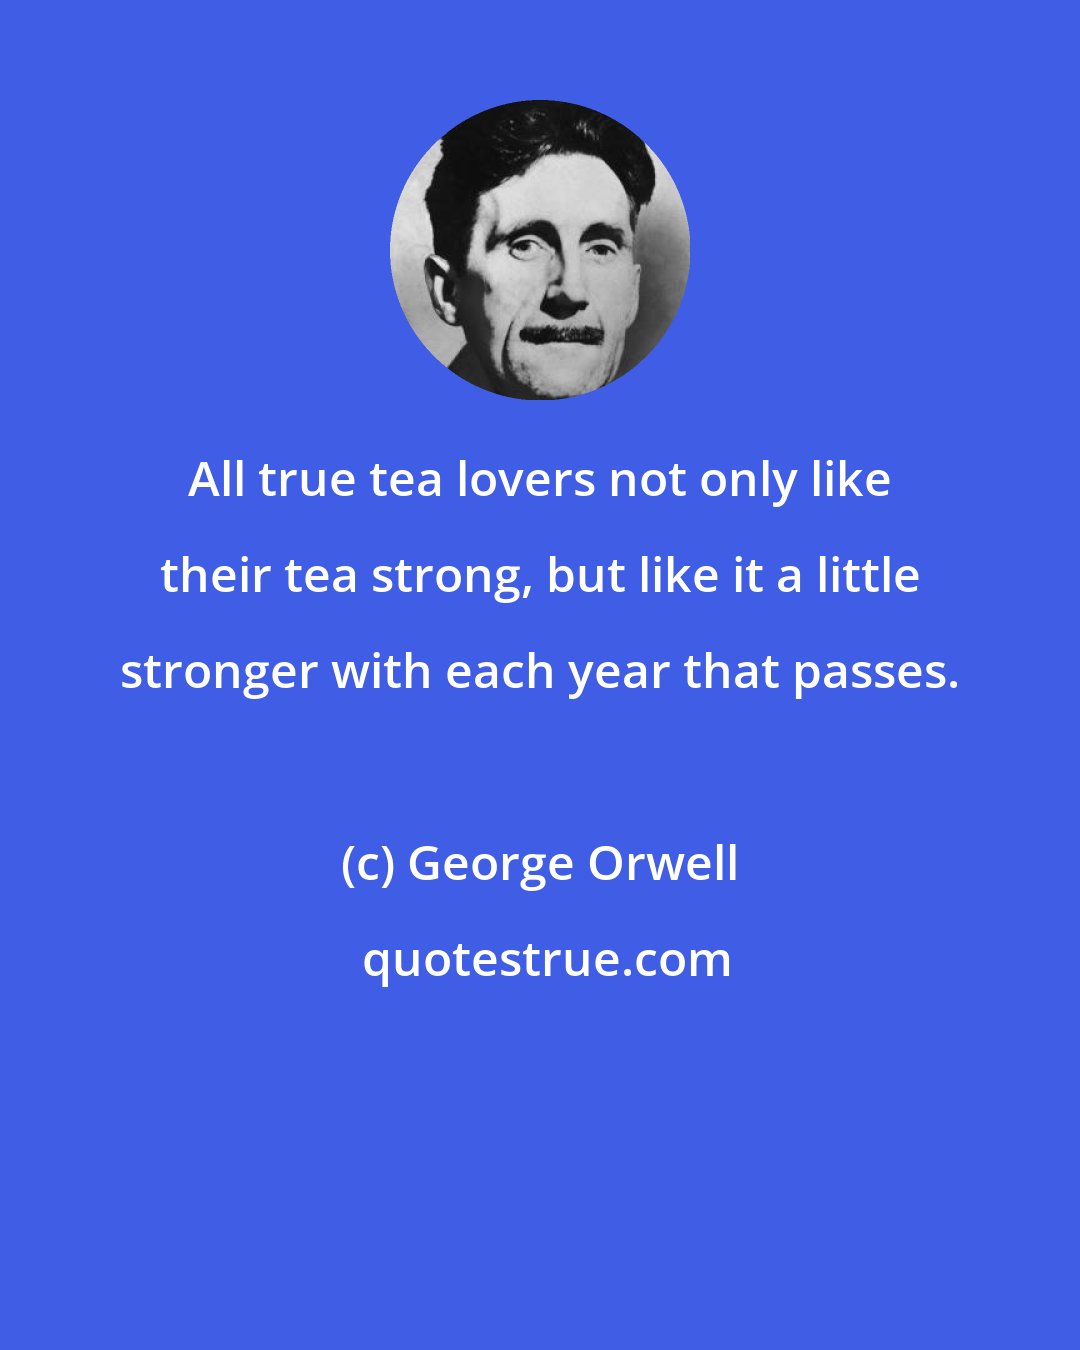 George Orwell: All true tea lovers not only like their tea strong, but like it a little stronger with each year that passes.